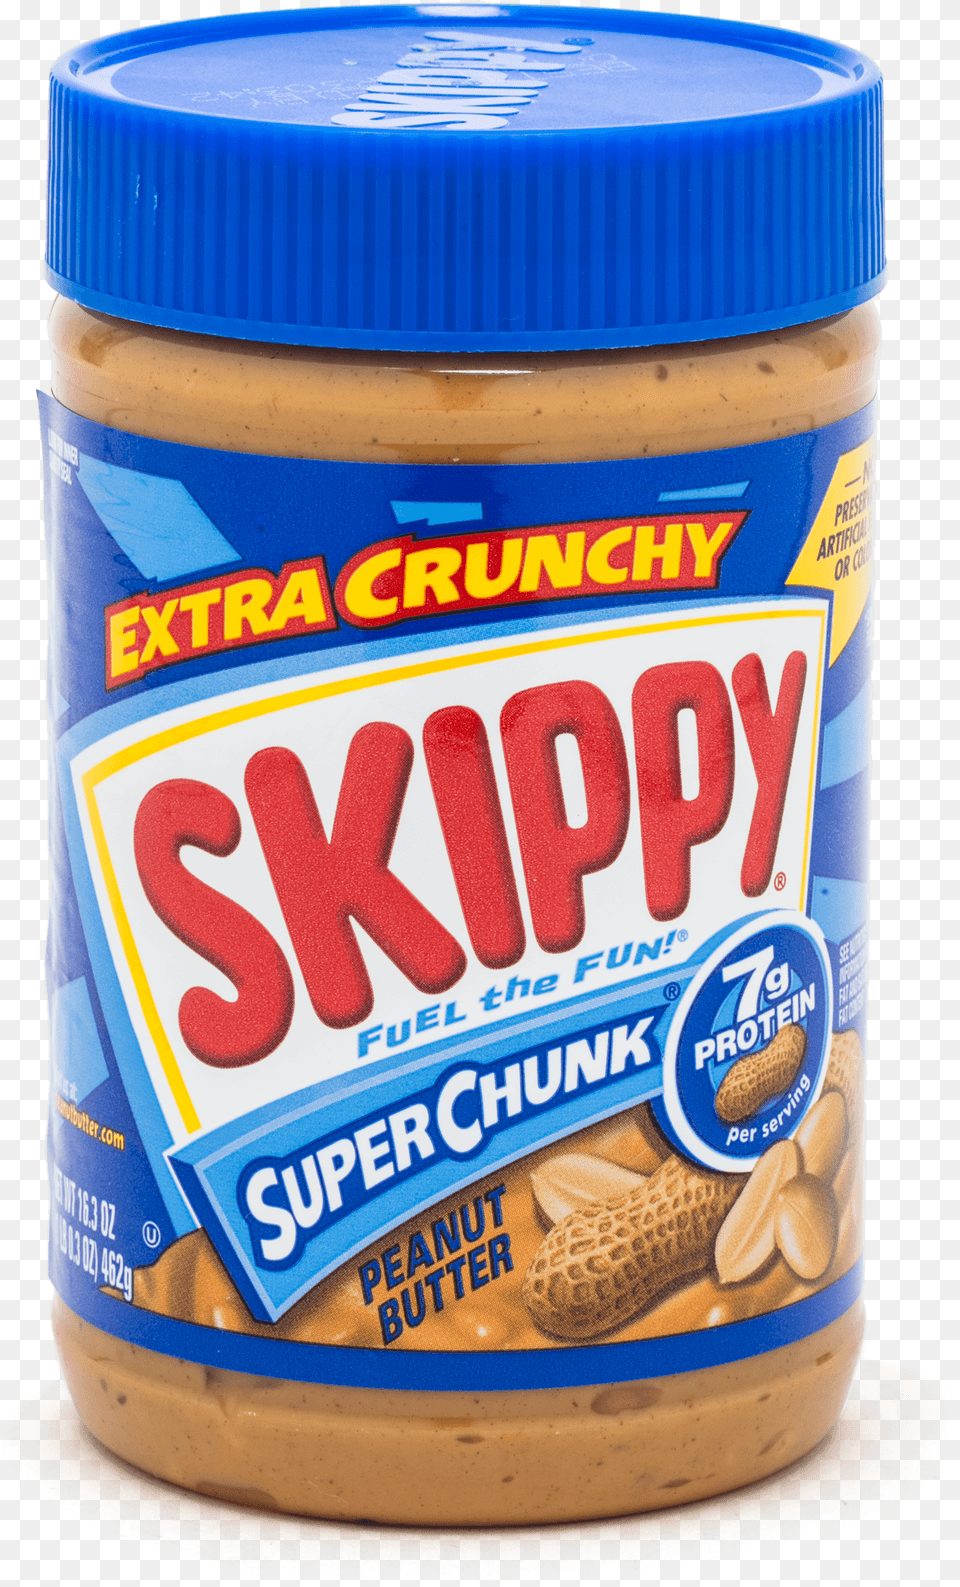 The Best Crunchy Peanut Butter Cooks Illustrated Skippy Peanut Butter Crunchy, Food, Peanut Butter, Can, Tin Png